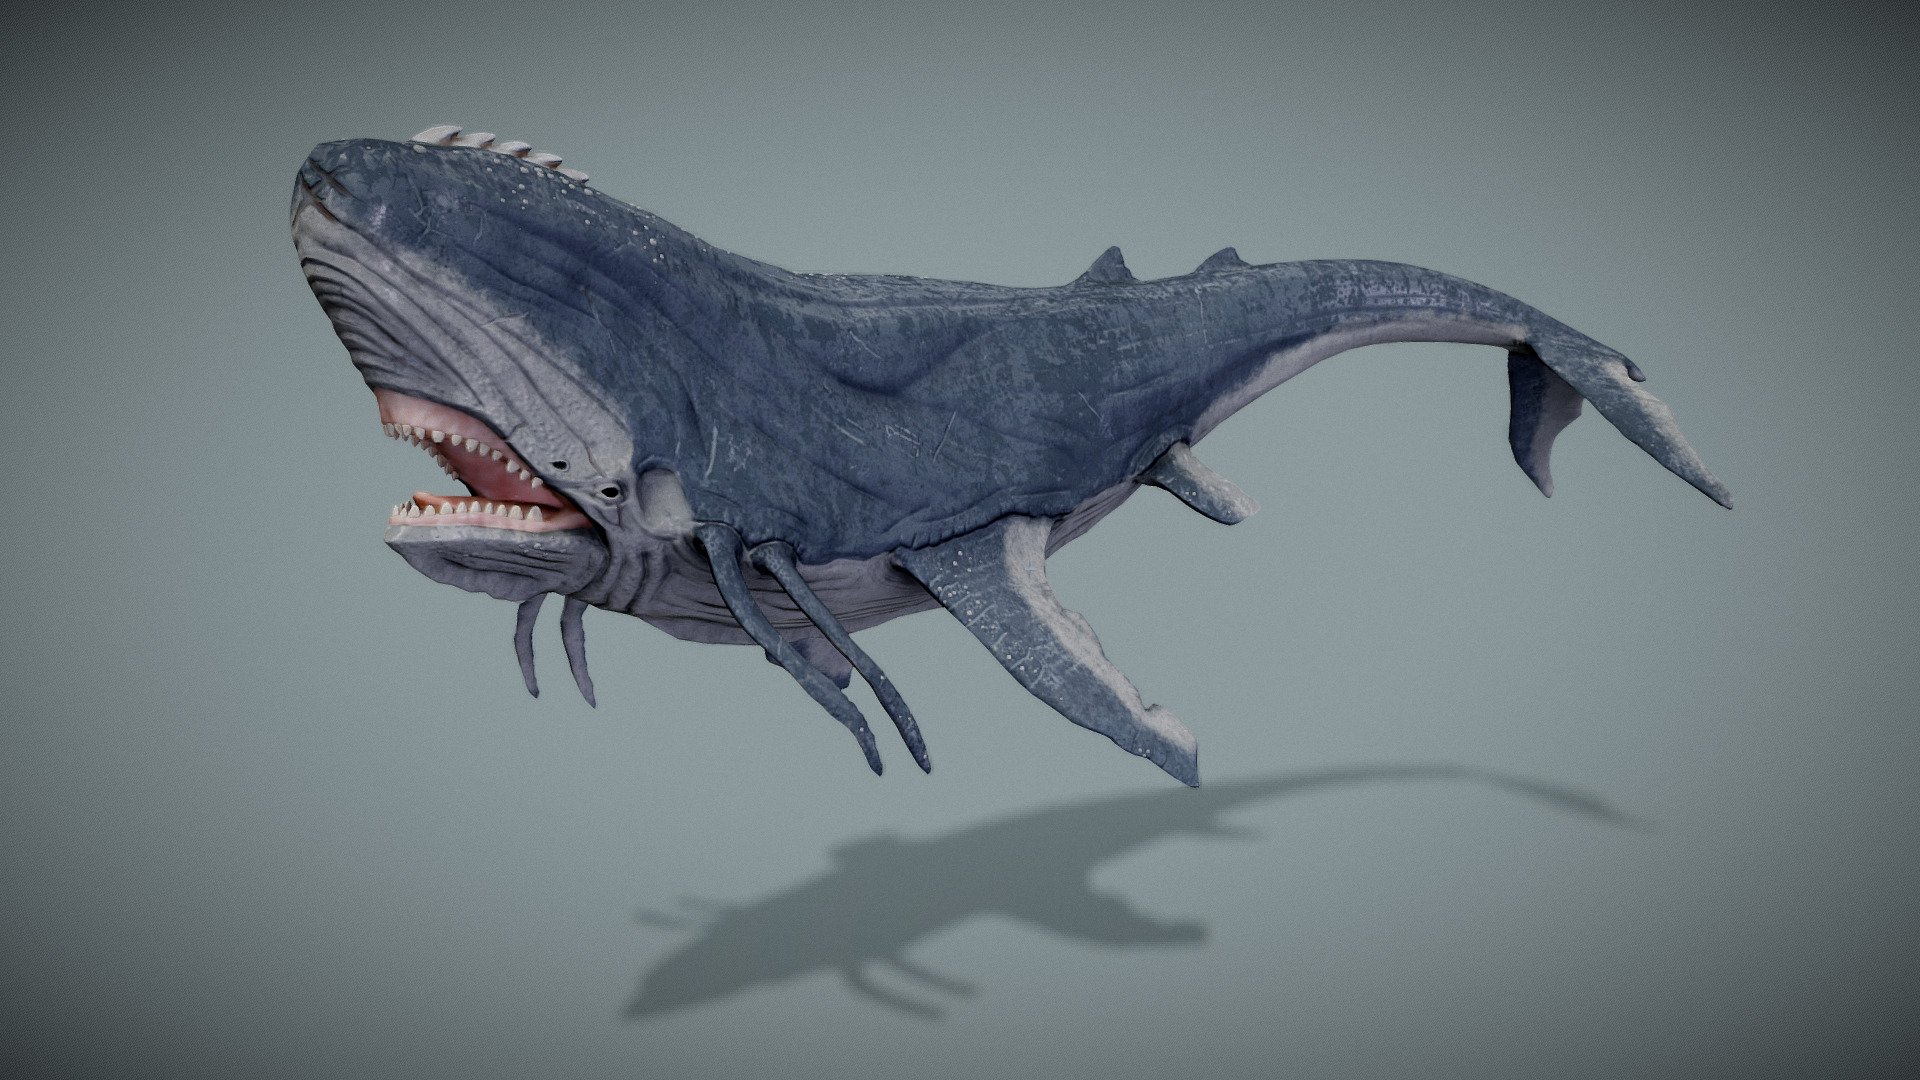 A model I made last year. It is inspired to whales of the game Dishonored.
More on https://www.artstation.com/artwork/dOxgnJ - The Whale - Fan art - 3D model by Davide Zecca (@davzecca) 3d model